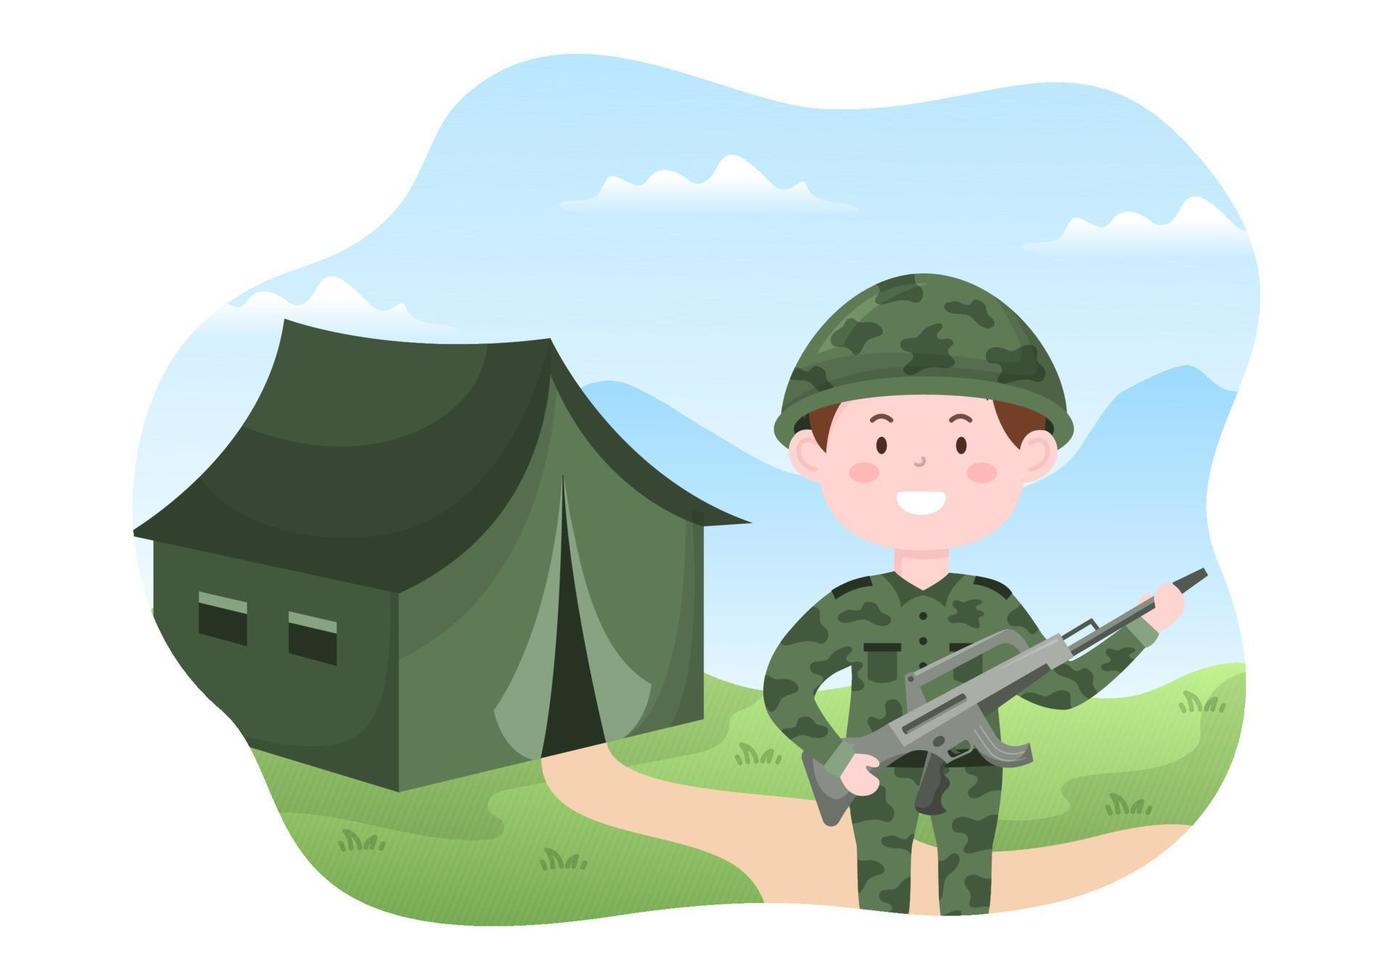 Military Army Force Template Hand Drawn Cute Cartoon Flat Illustration with Soldier, Weapon, Tank or Protective Heavy Equipment vector